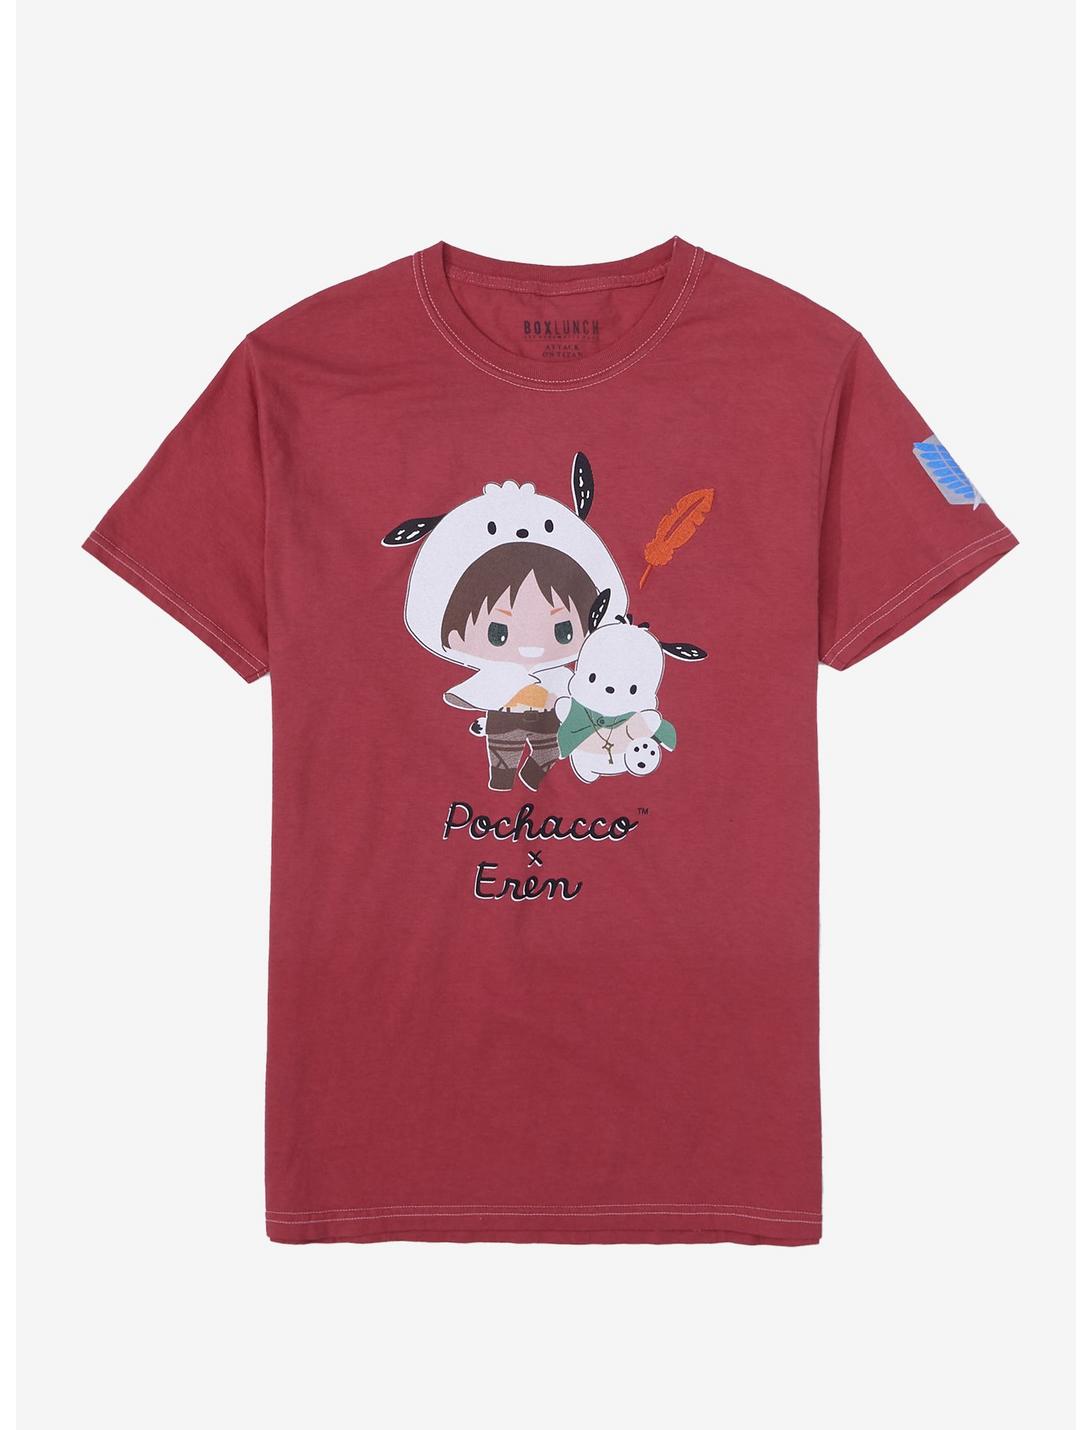 Sanrio Hello Kitty and Friends x Attack on Titan Pochacco & Eren T-Shirt - BoxLunch Exclusive, MAROON, hi-res